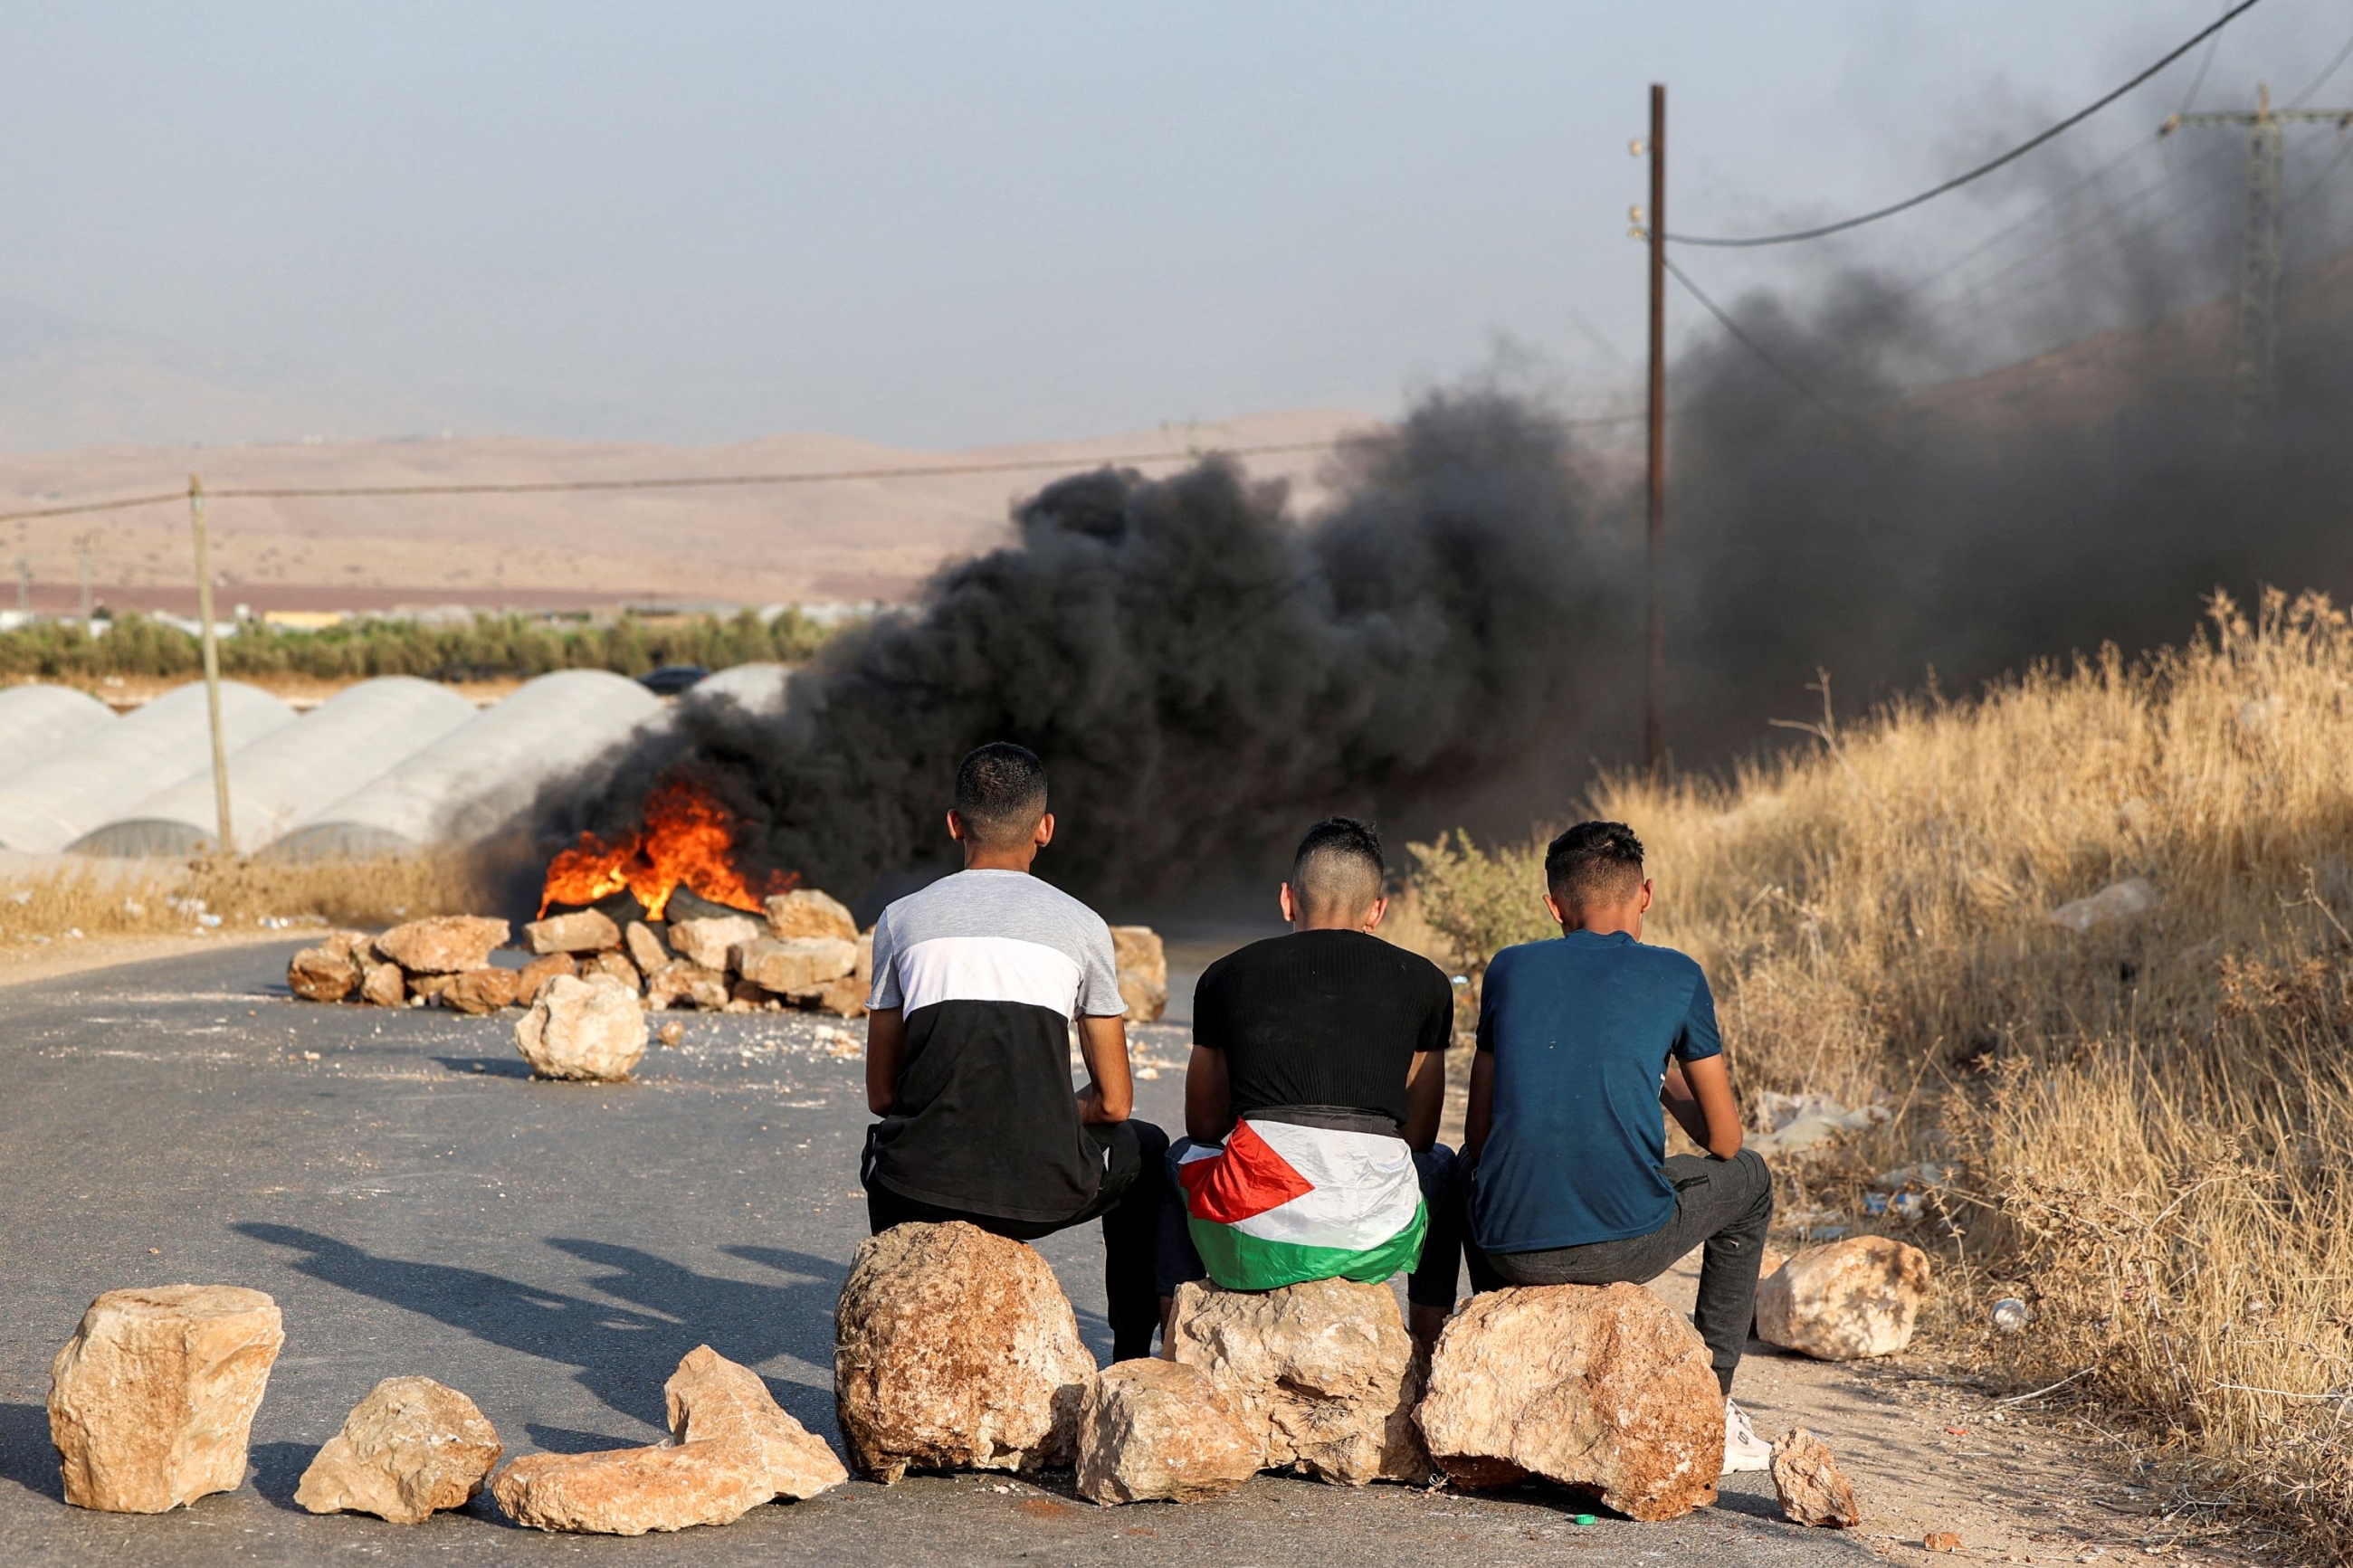 Palestinian men sit on rocks forming a make-shift barricade near flaming tires as they protest against the closure of a road near the site of an attack on an Israeli bus east of the Palestinian city of Tubas in the north of the occupied West Bank on September 4, 2022 (AFP)